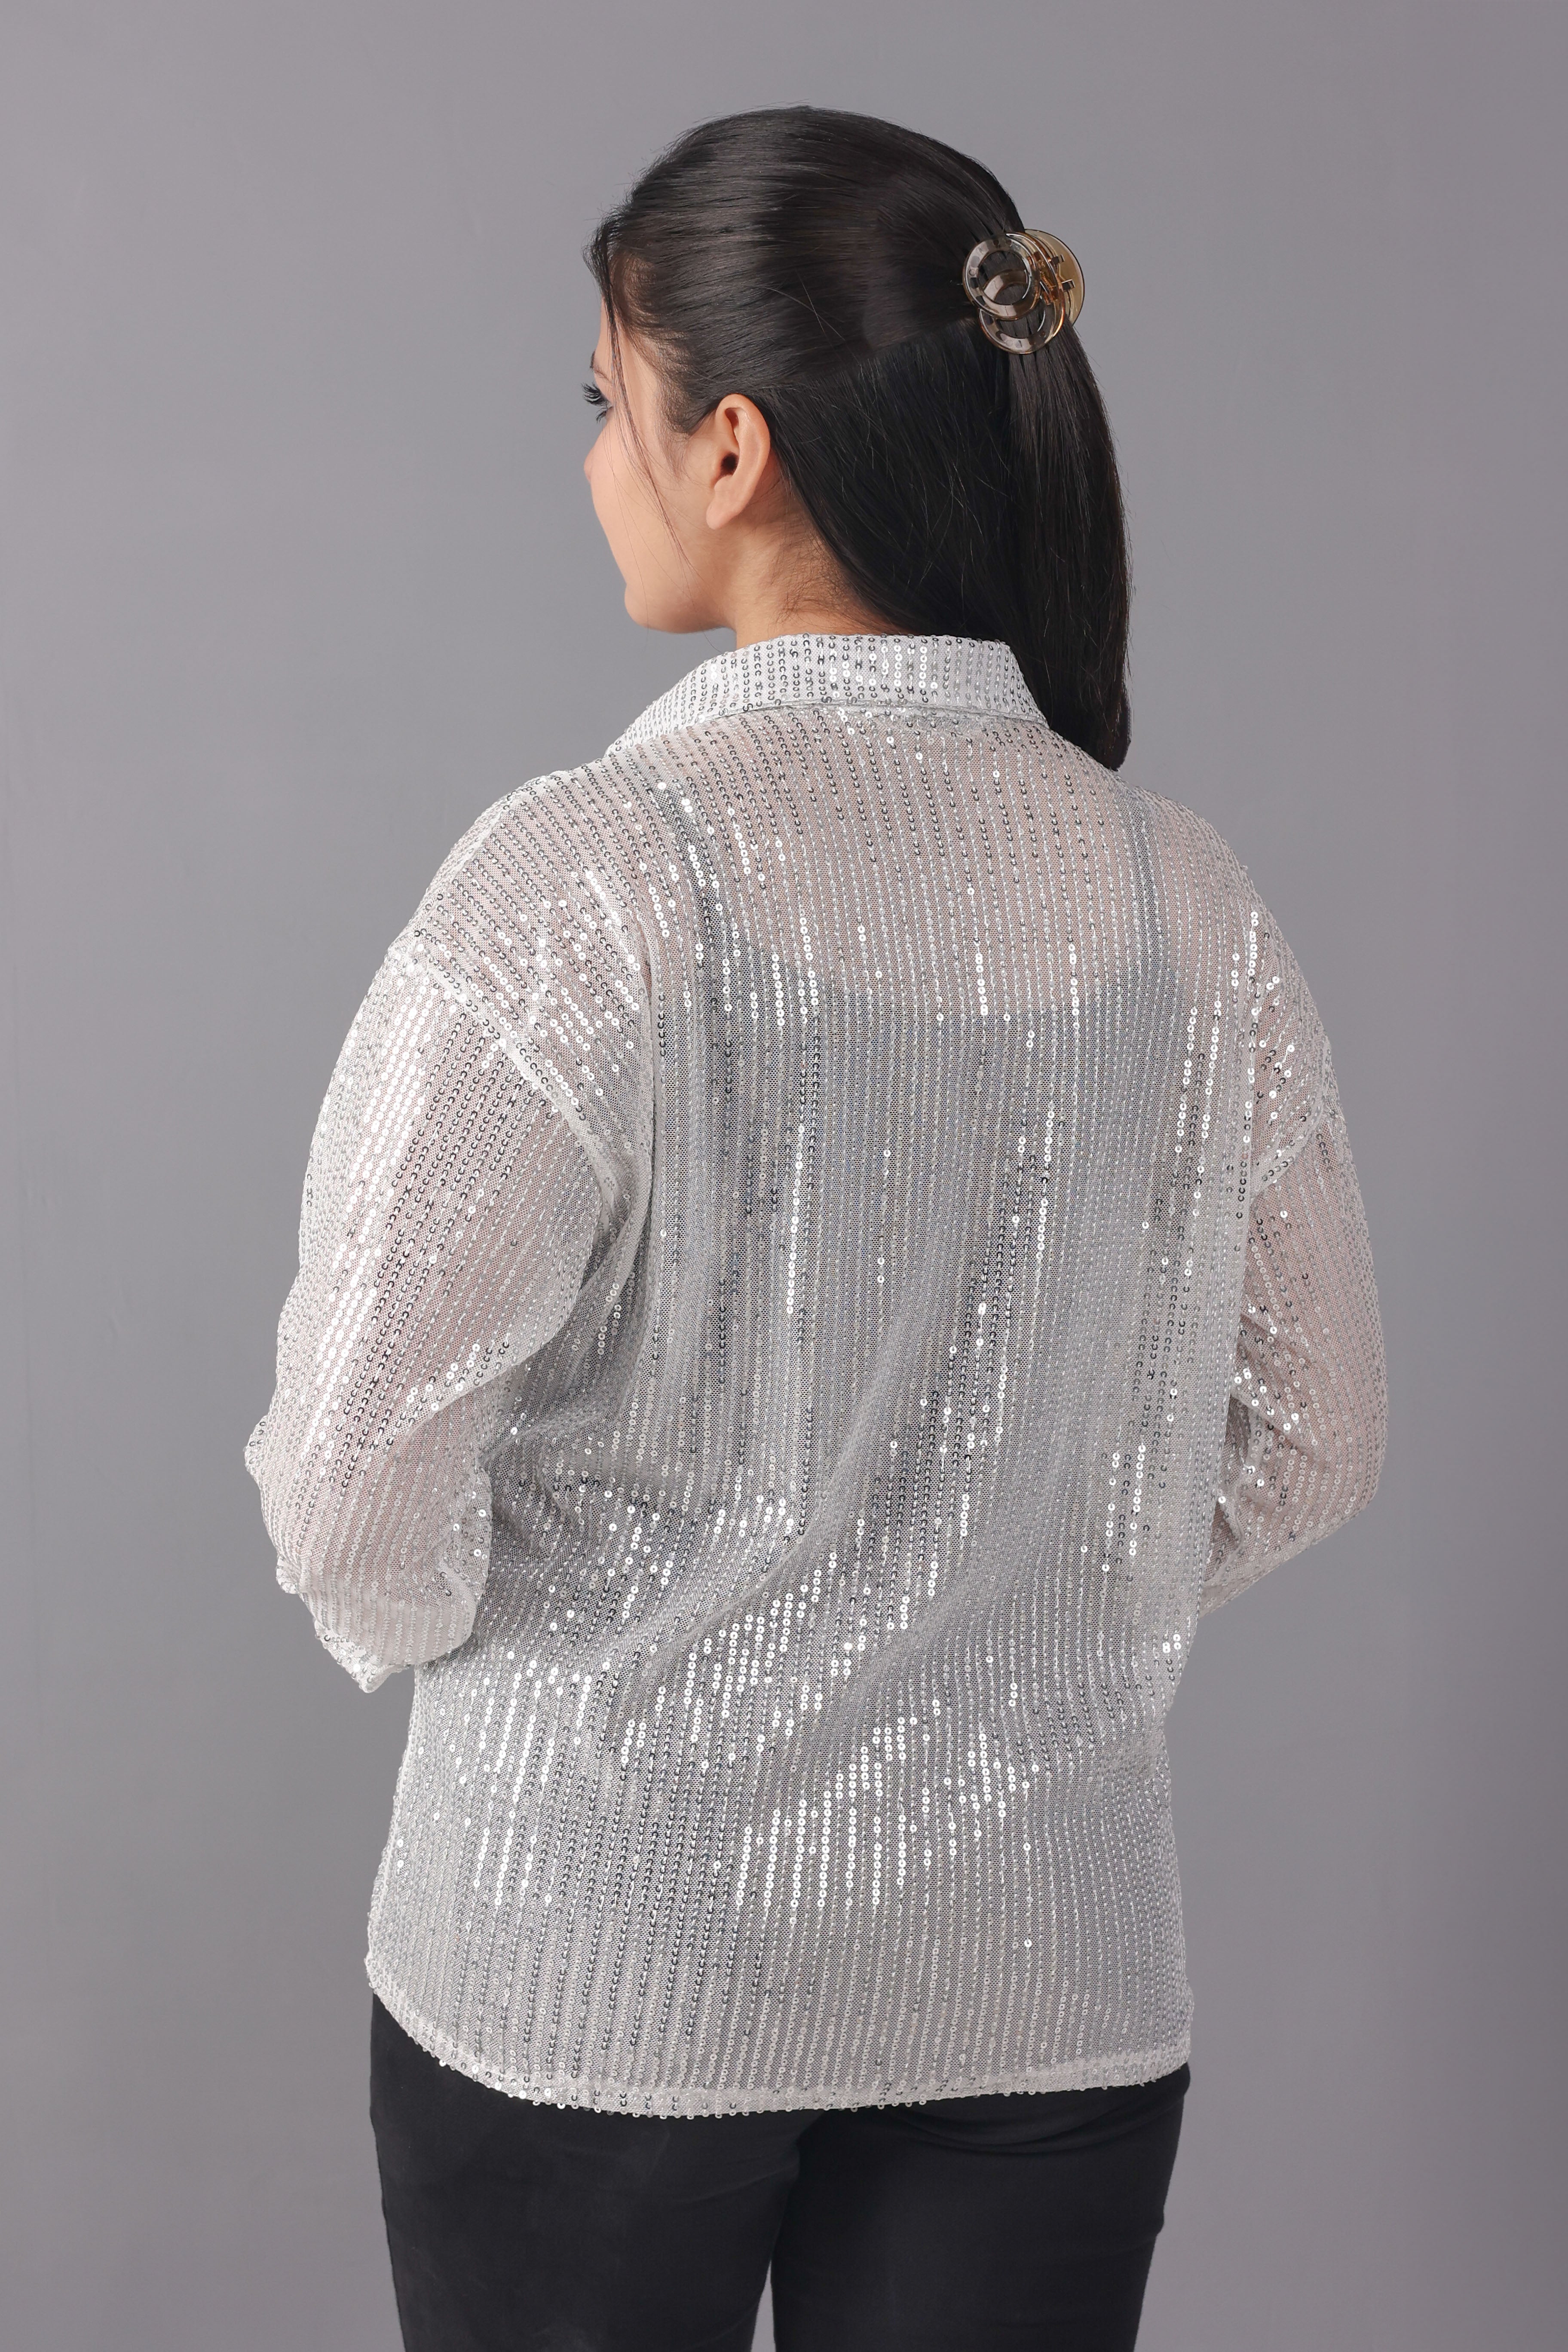 Net sequence party wear top